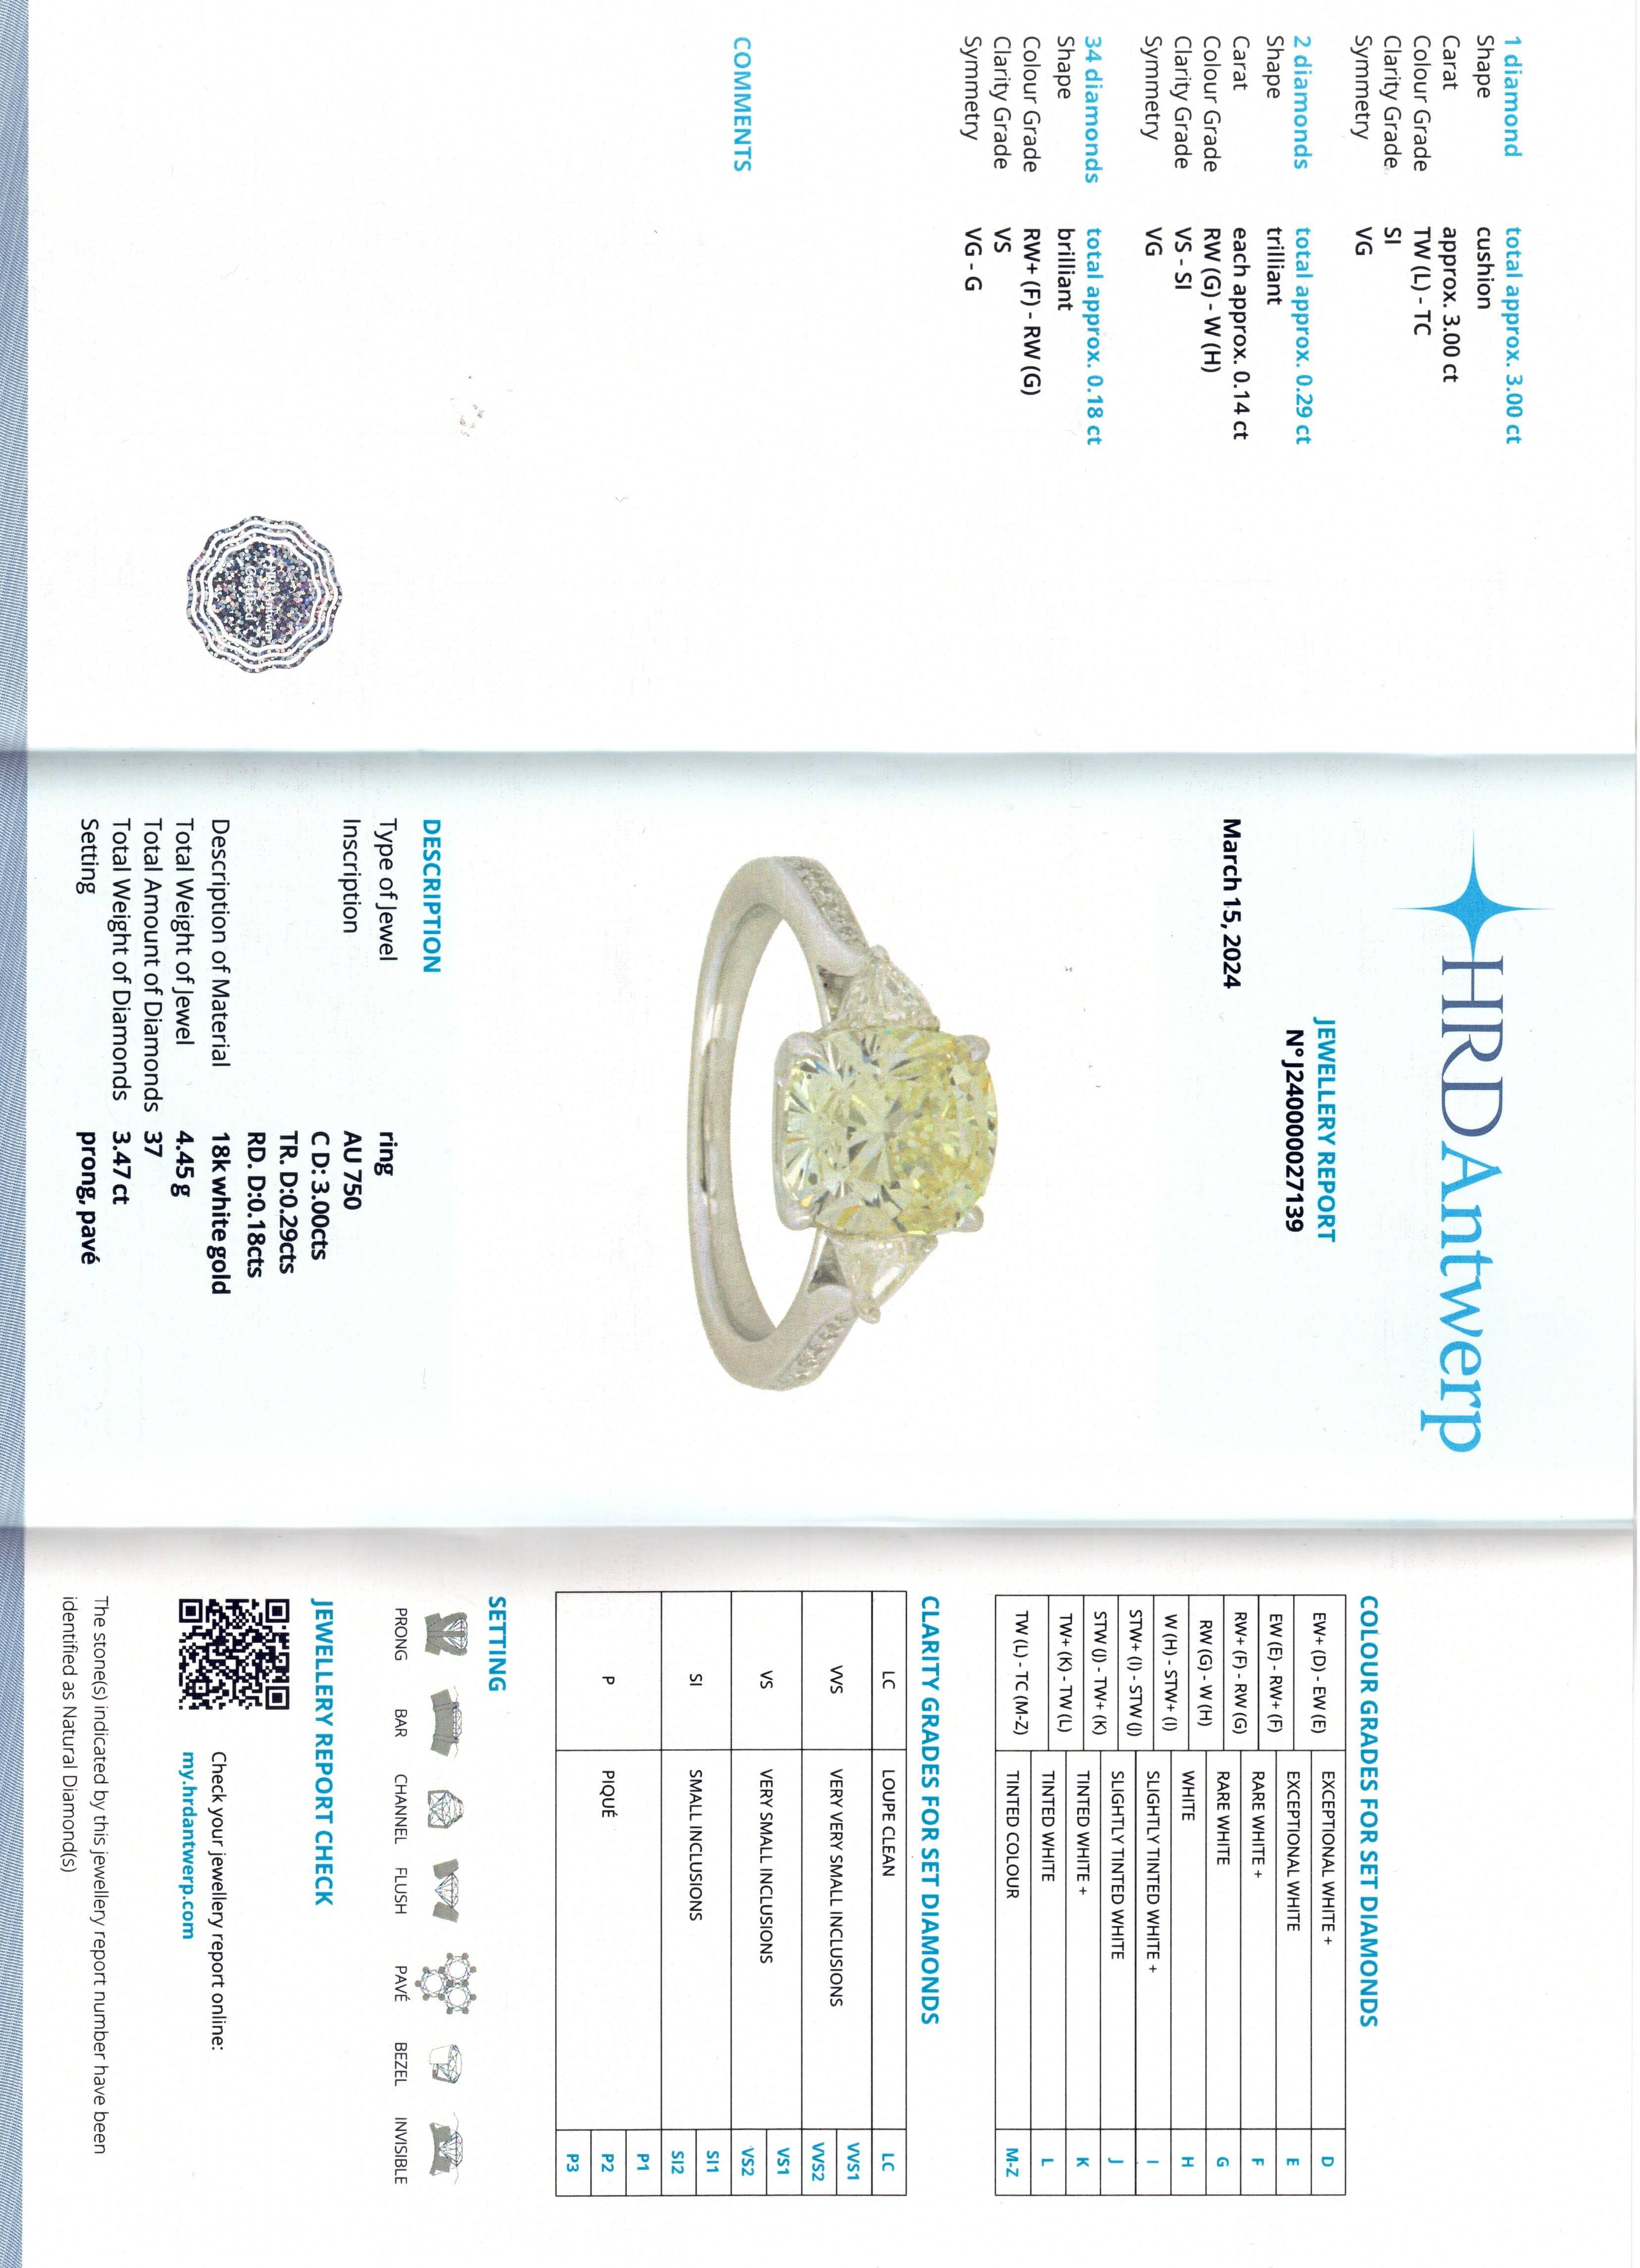 HRDAntwerp certified 3 Carat Diamond Cocktail Ring In New Condition For Sale In Dubai, UAE